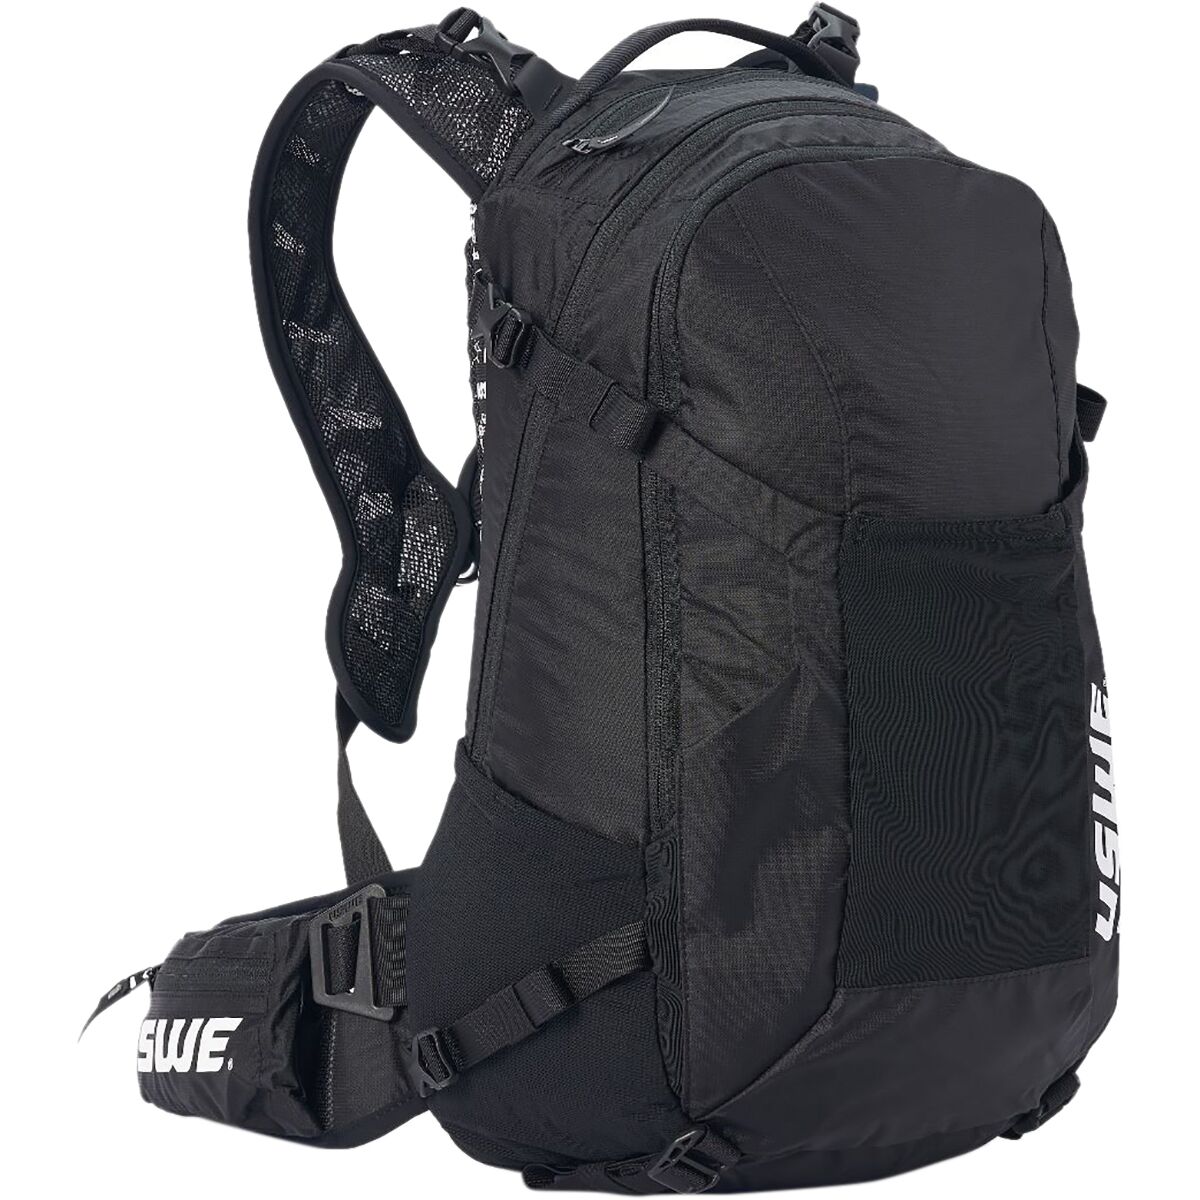 USWE Shred 16L Backpack Carbon Black, One Size